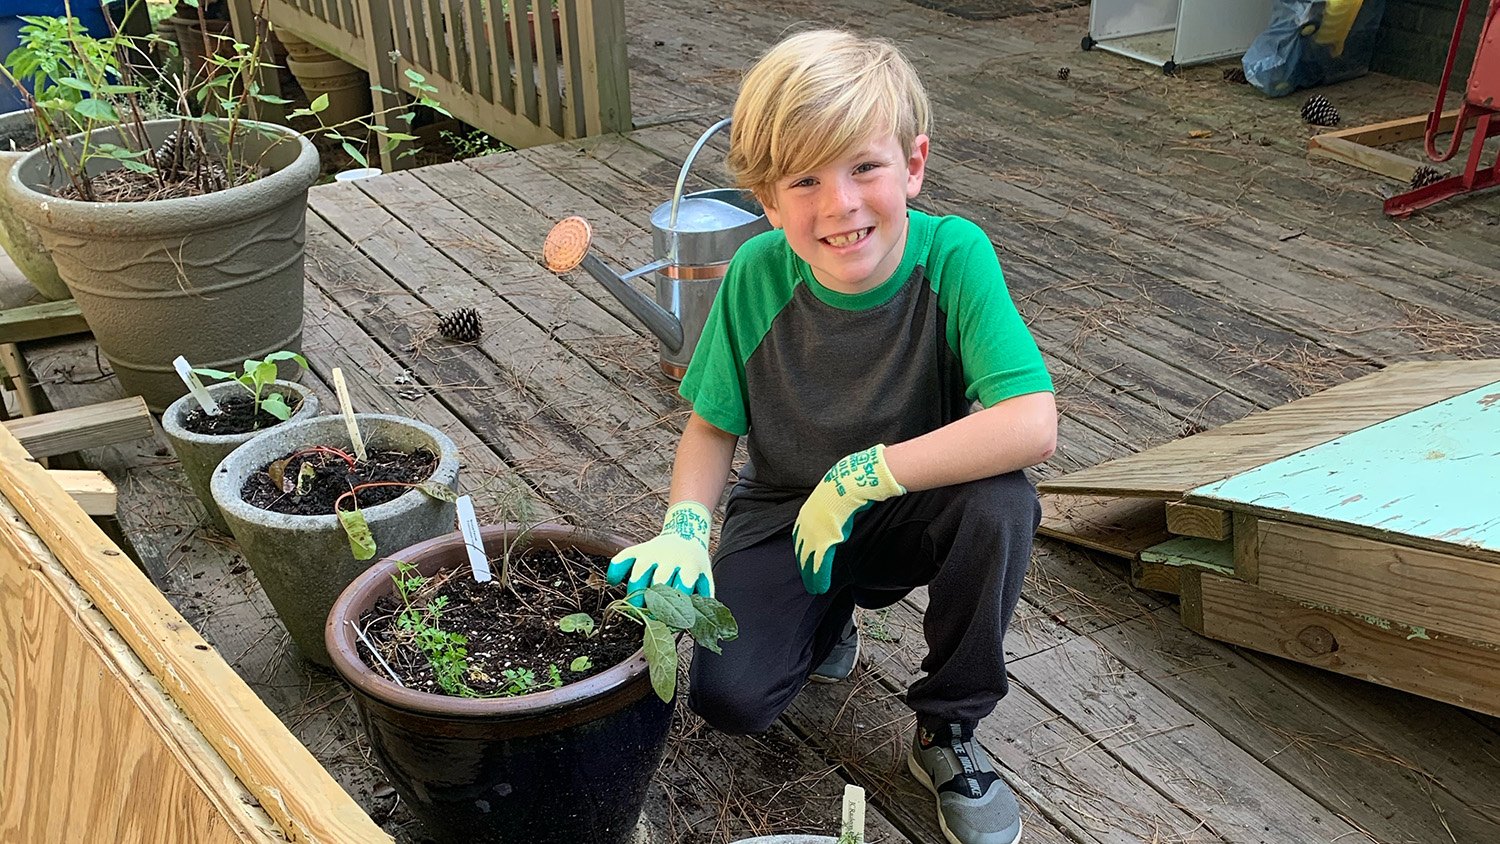 Child on outdoor deck posing with his container garden